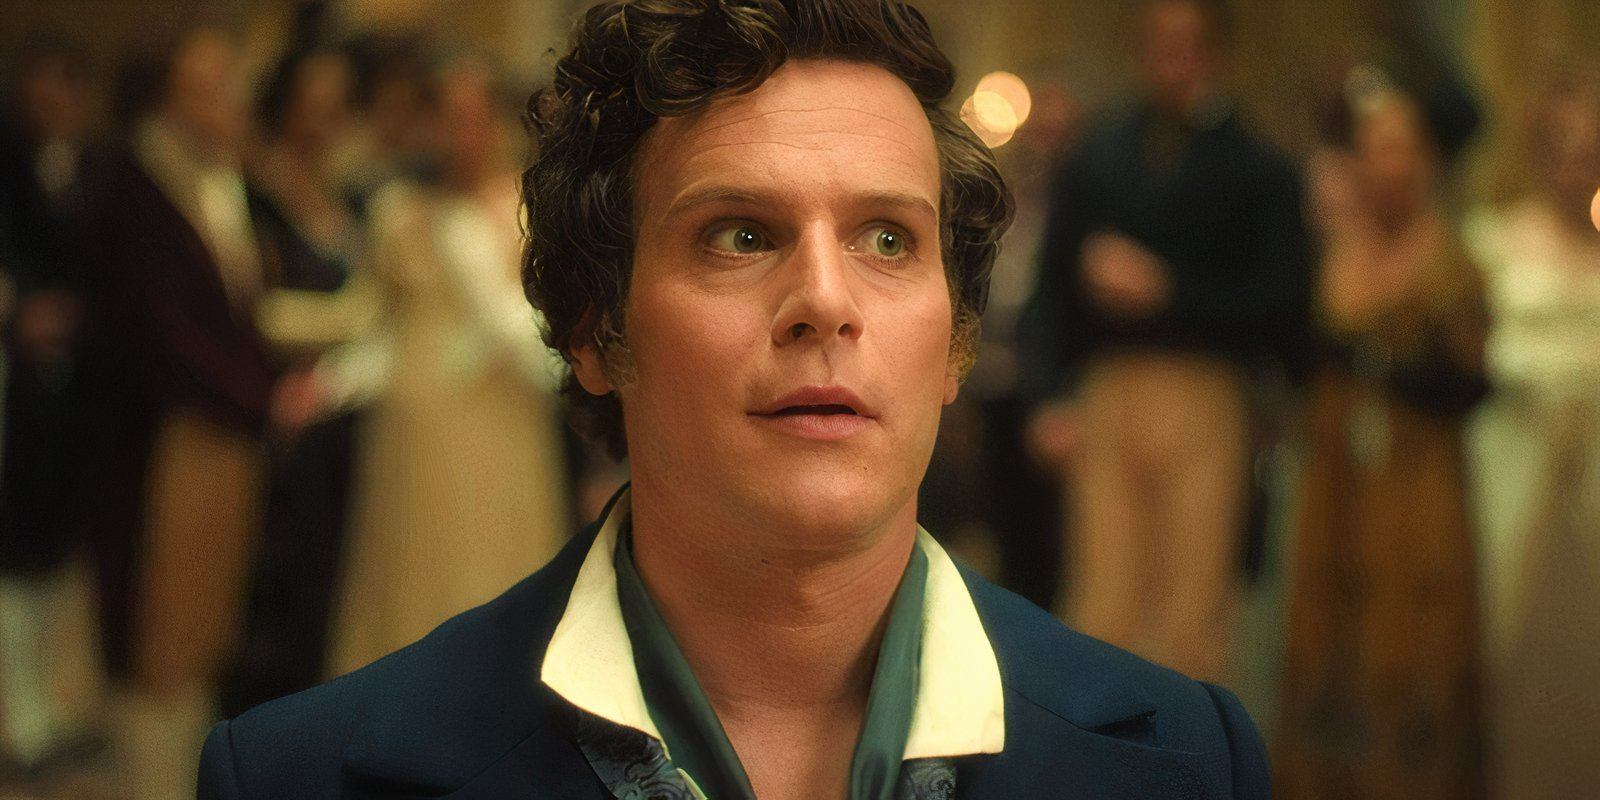 Jonathan Groff as Rogue looking confused in the middle of the ballroom in Doctor Who